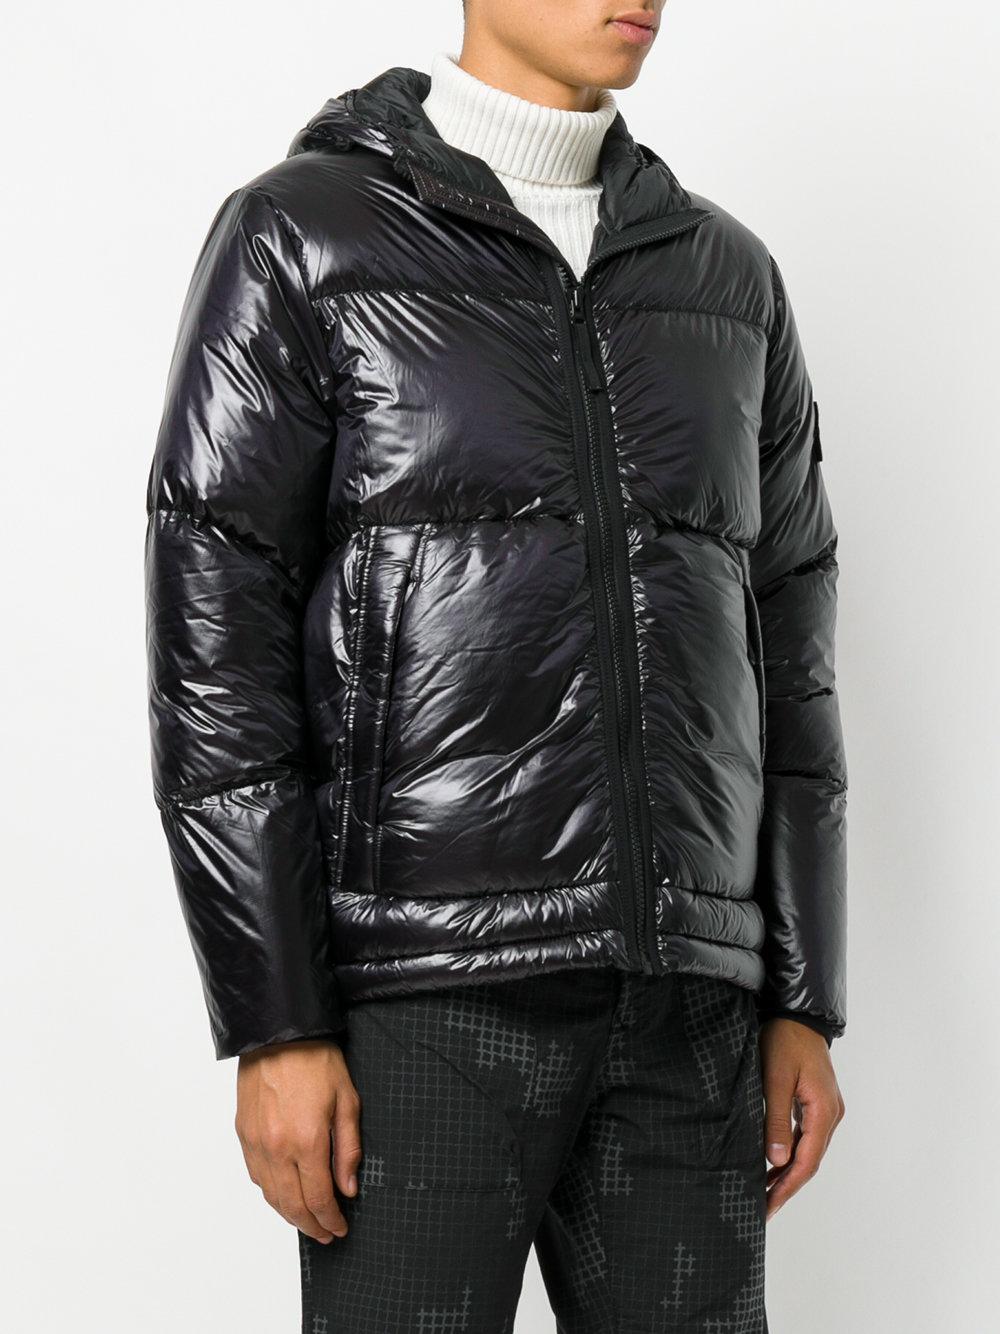 Stone Island Glossy Puffer Jacket In Black For Men Lyst